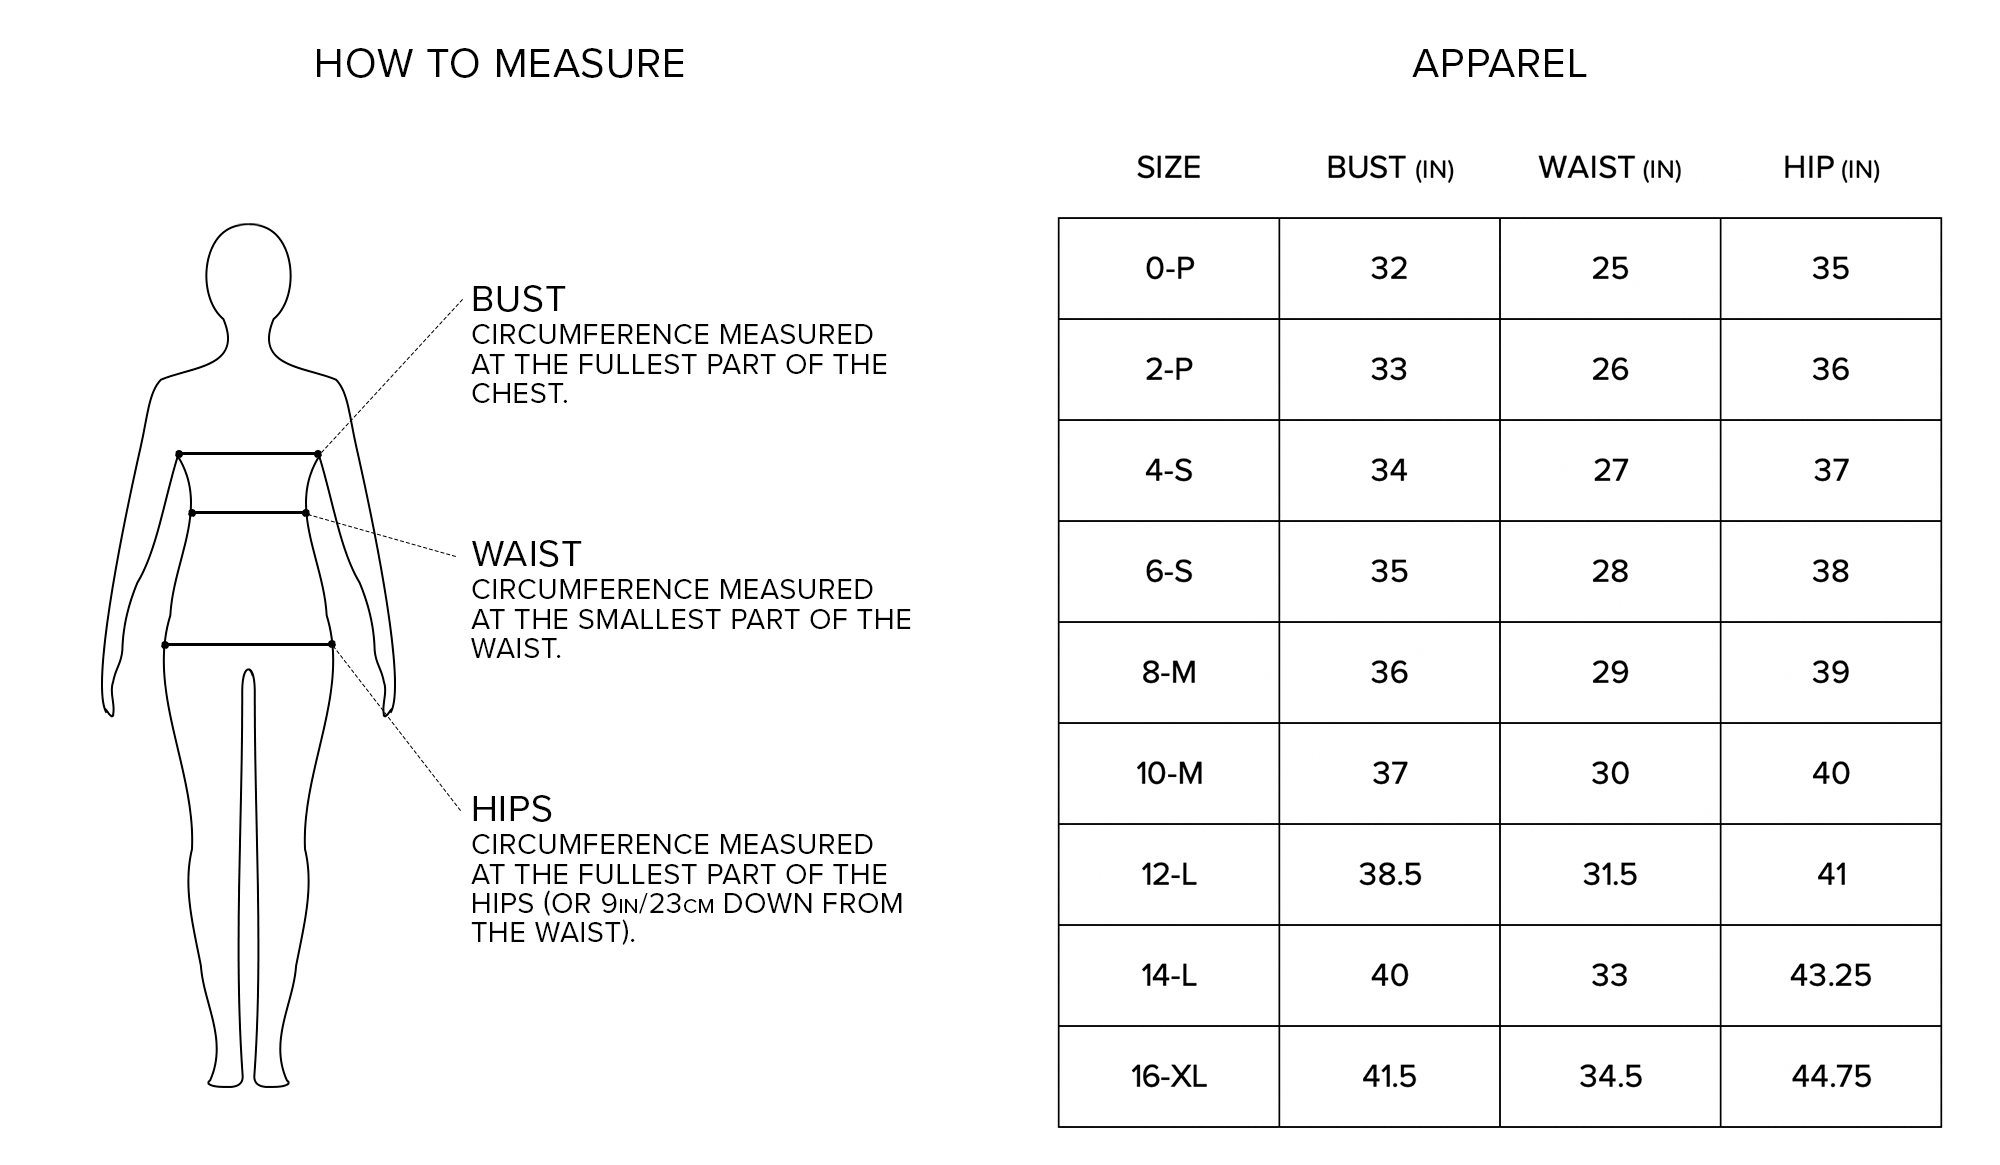 SIZE GUIDE How to Measure Apparel